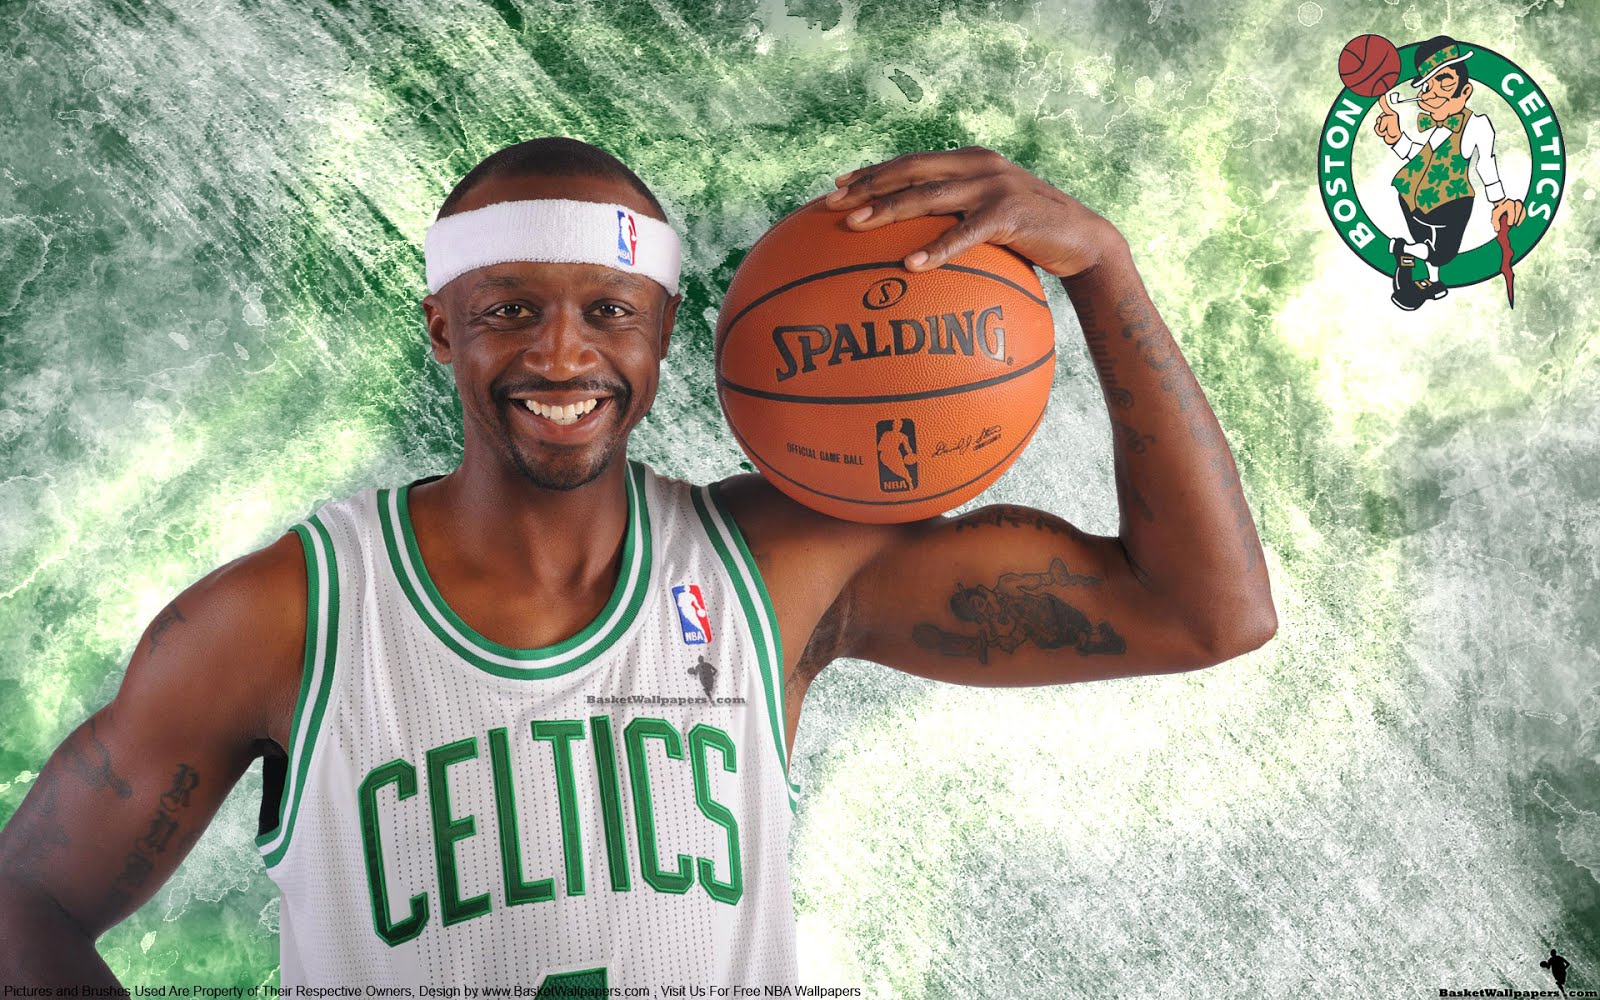 Wikipedia, Internet declare Jason Terry dead after vicious LeBron